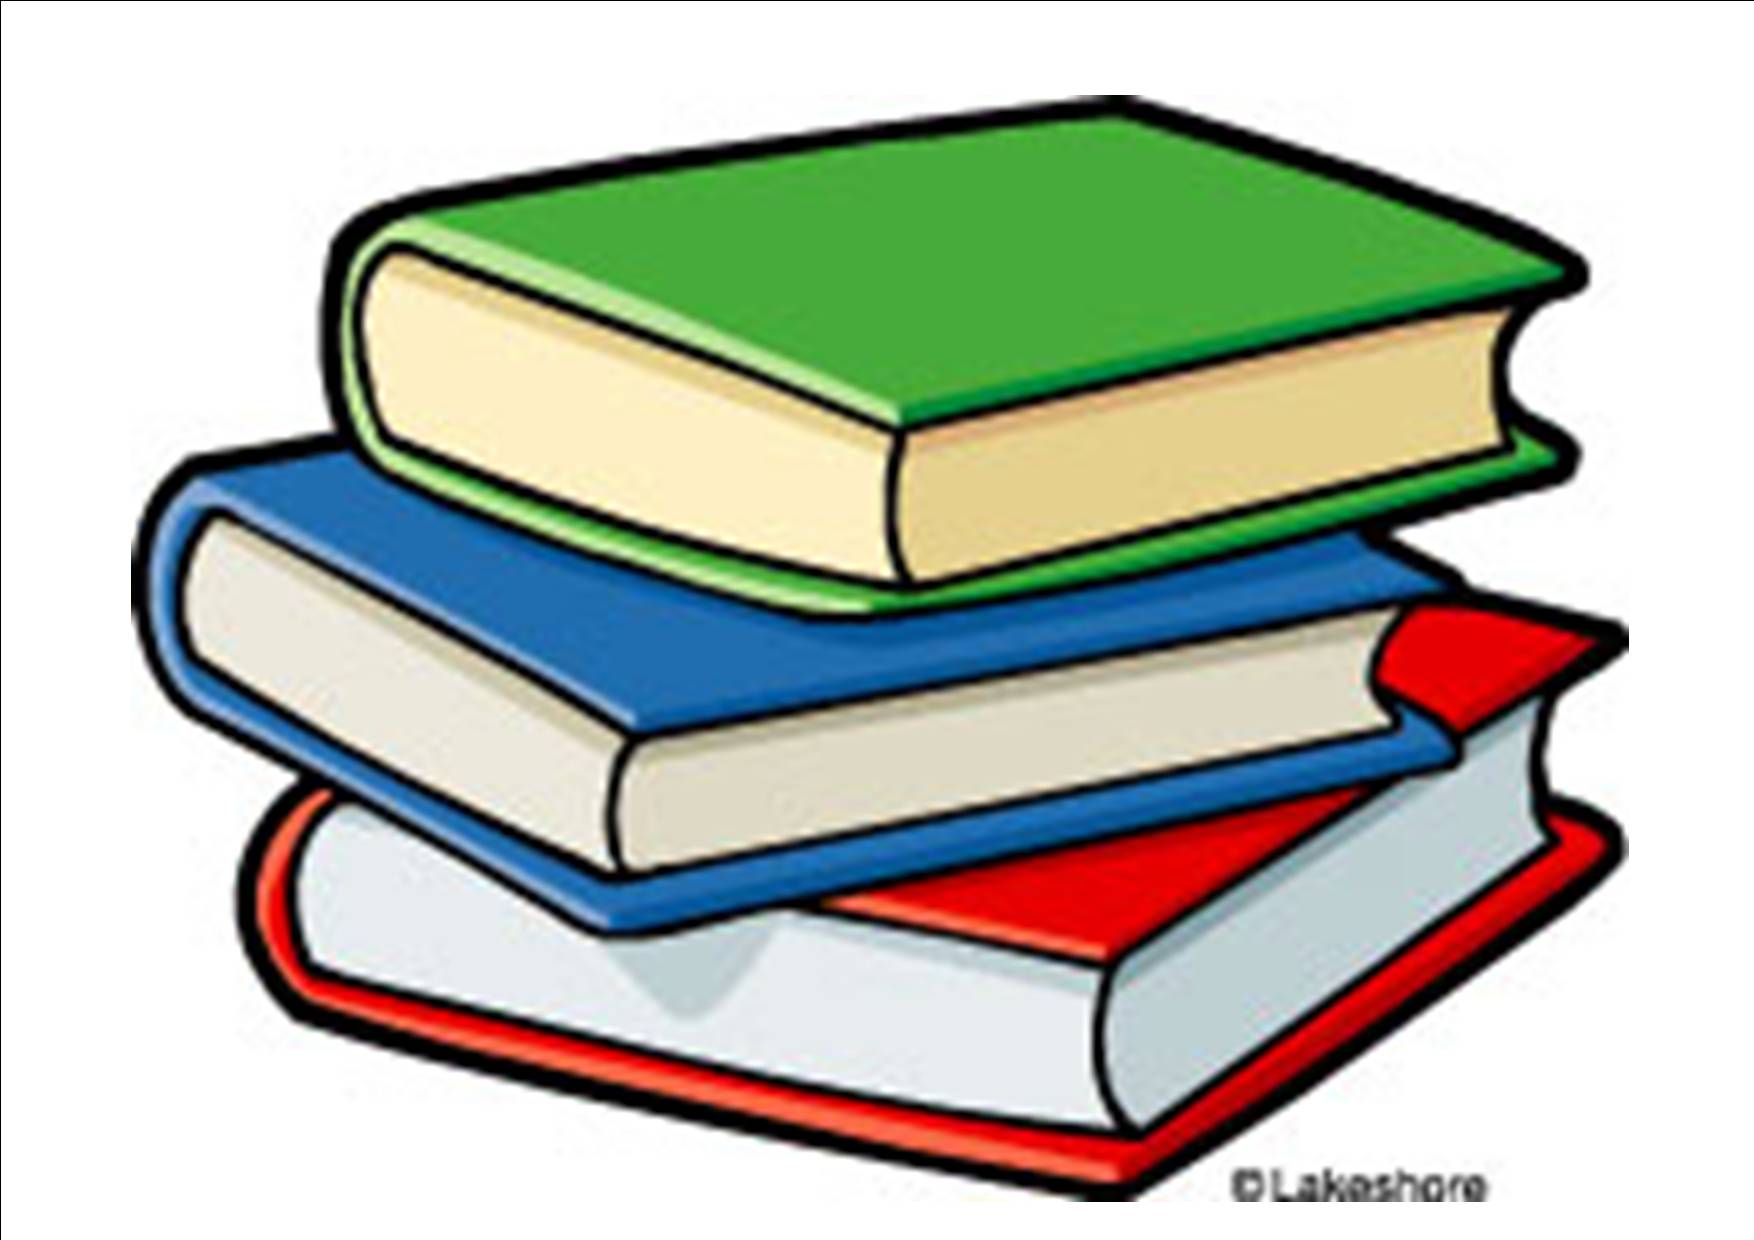 Stack Of Books Images   Clipart Panda   Free Clipart Images